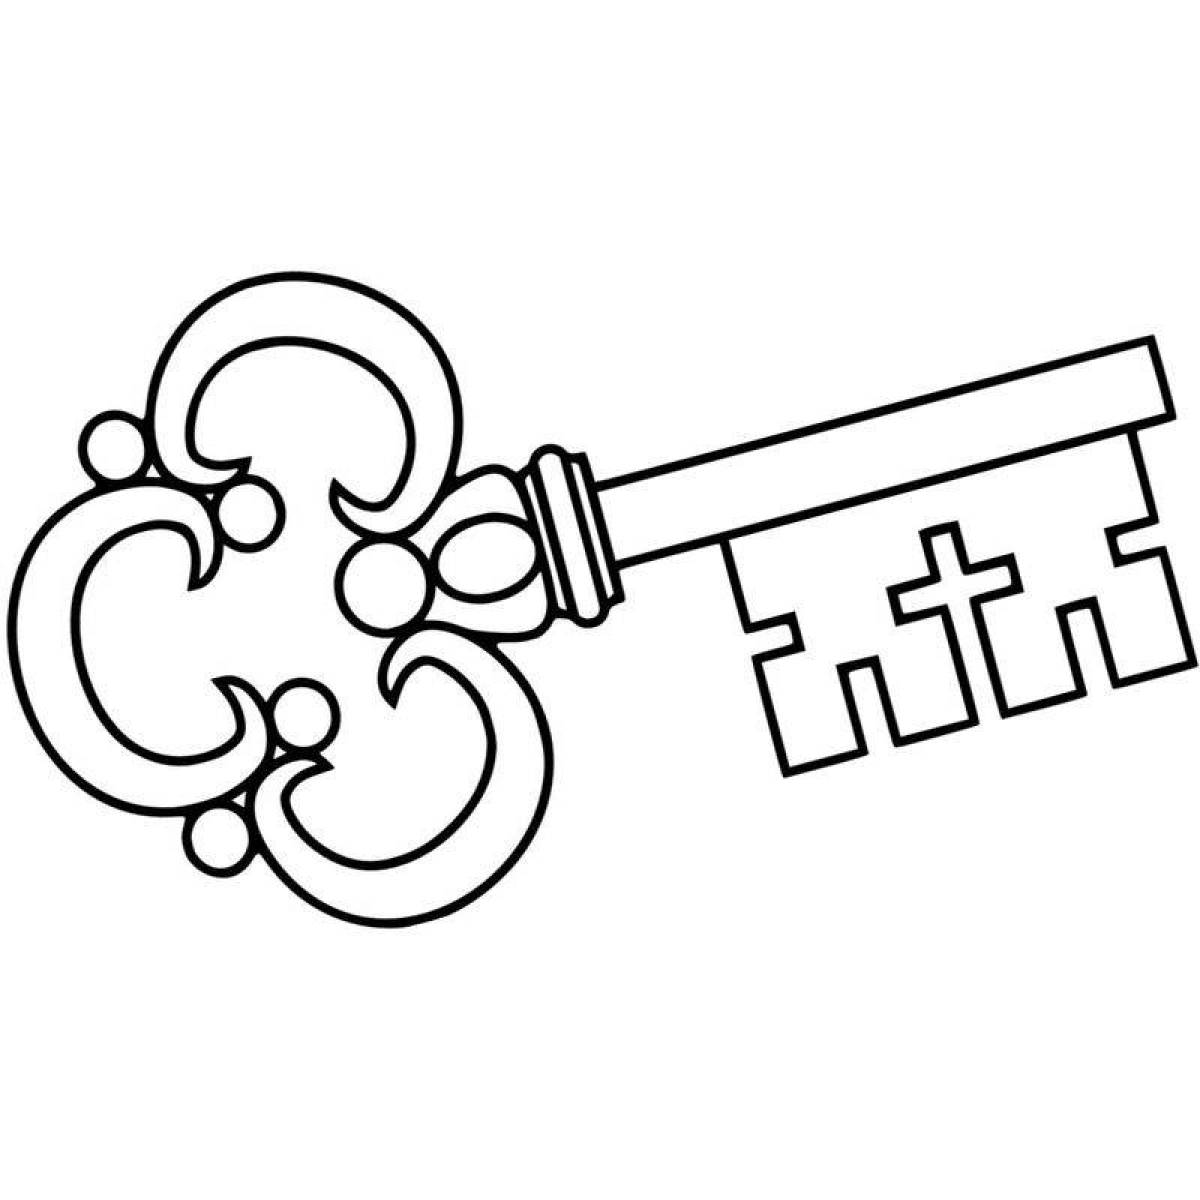 Great golden key coloring page